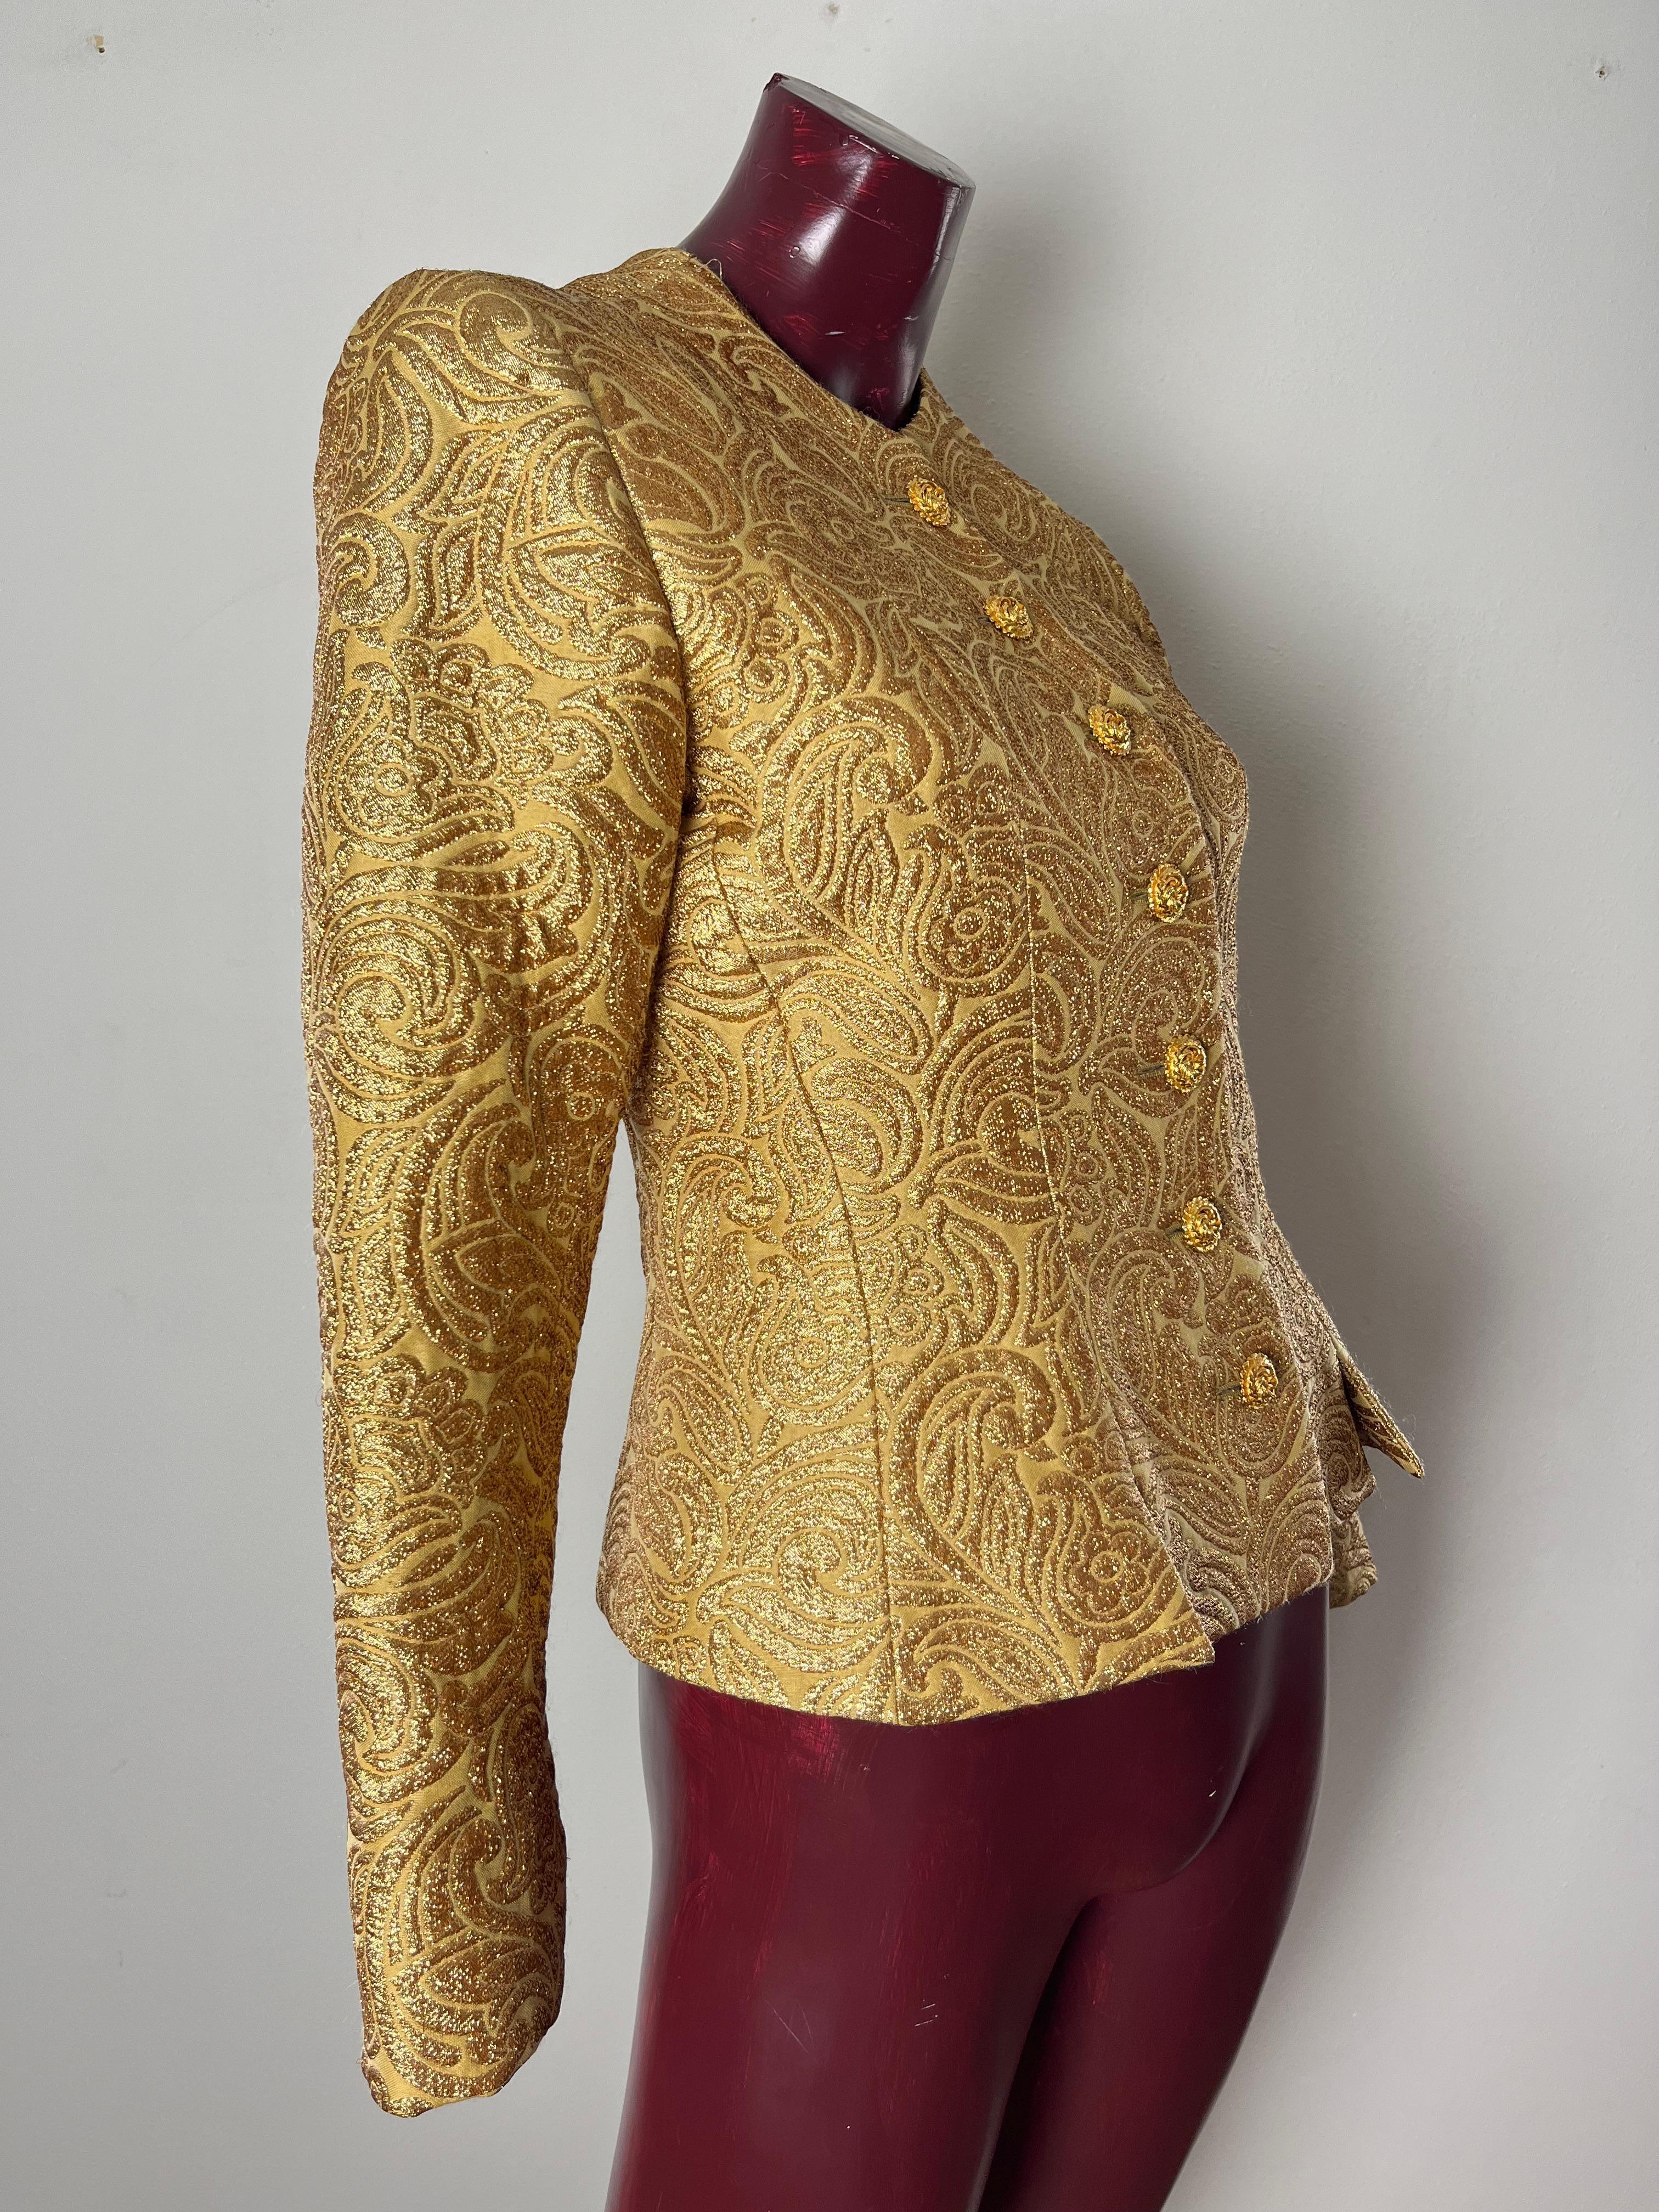 YSL gold brocade suit For Sale 4